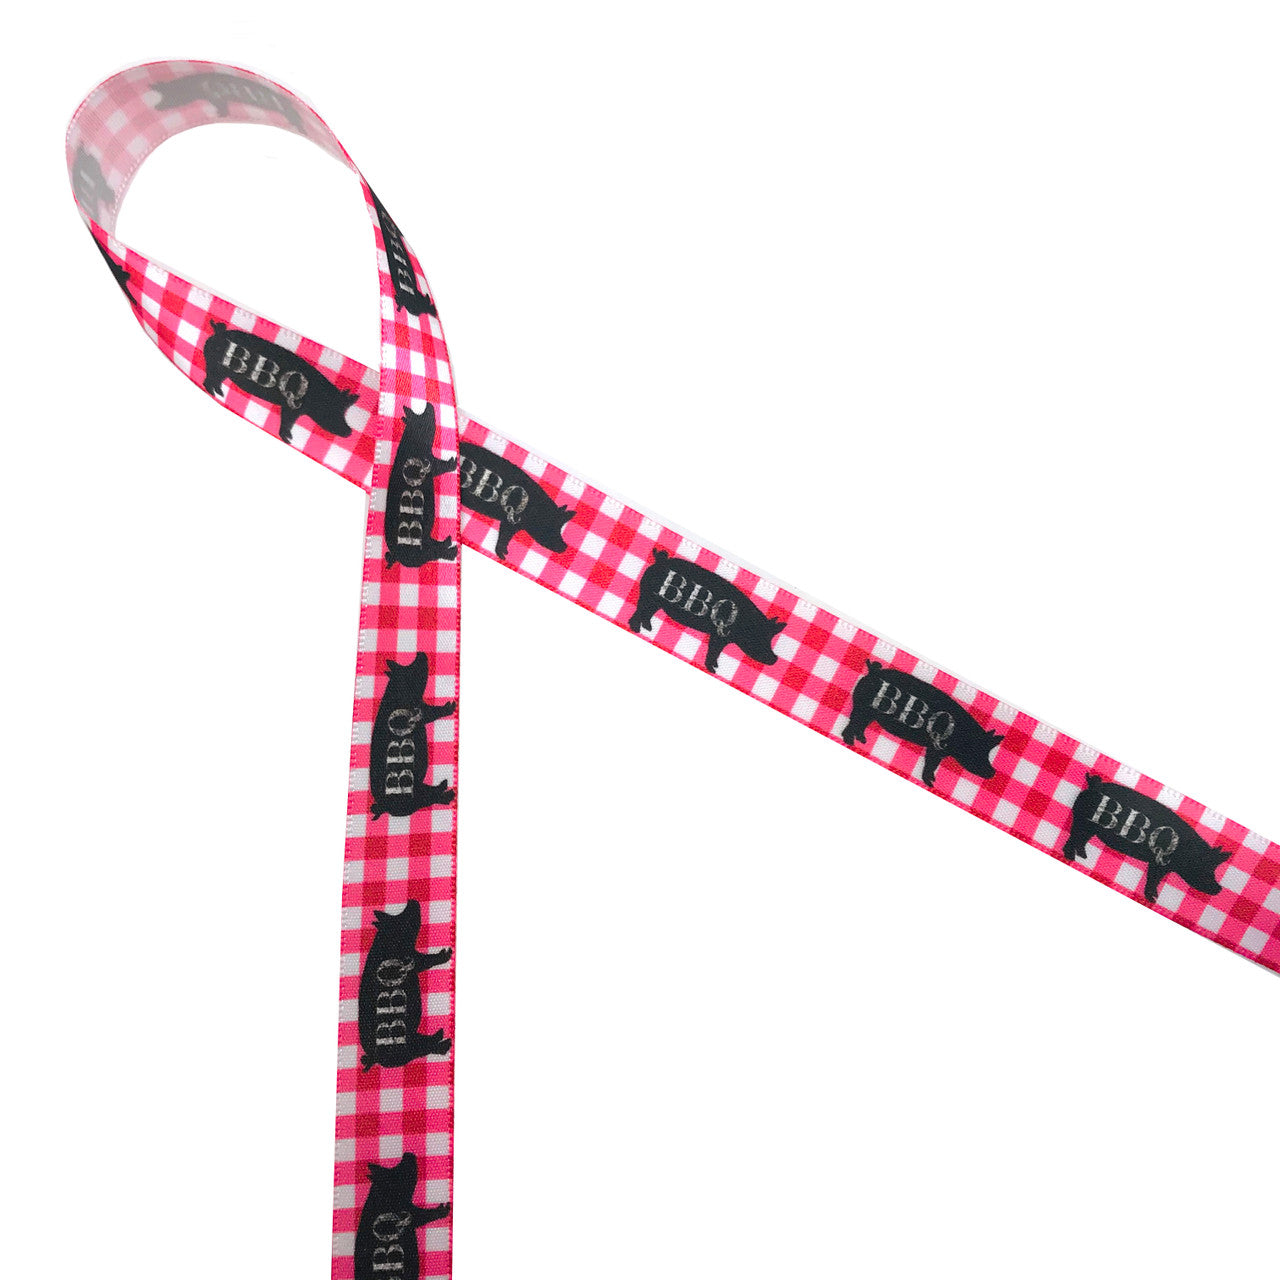 Barbecue ribbon featuring the silhouette of a pig in black with the letters BBQ cut out of his belly on red and white gingham background printed on 5/8" white single face satin ribbon. What an ideal ribbon for a barbecue themed party!